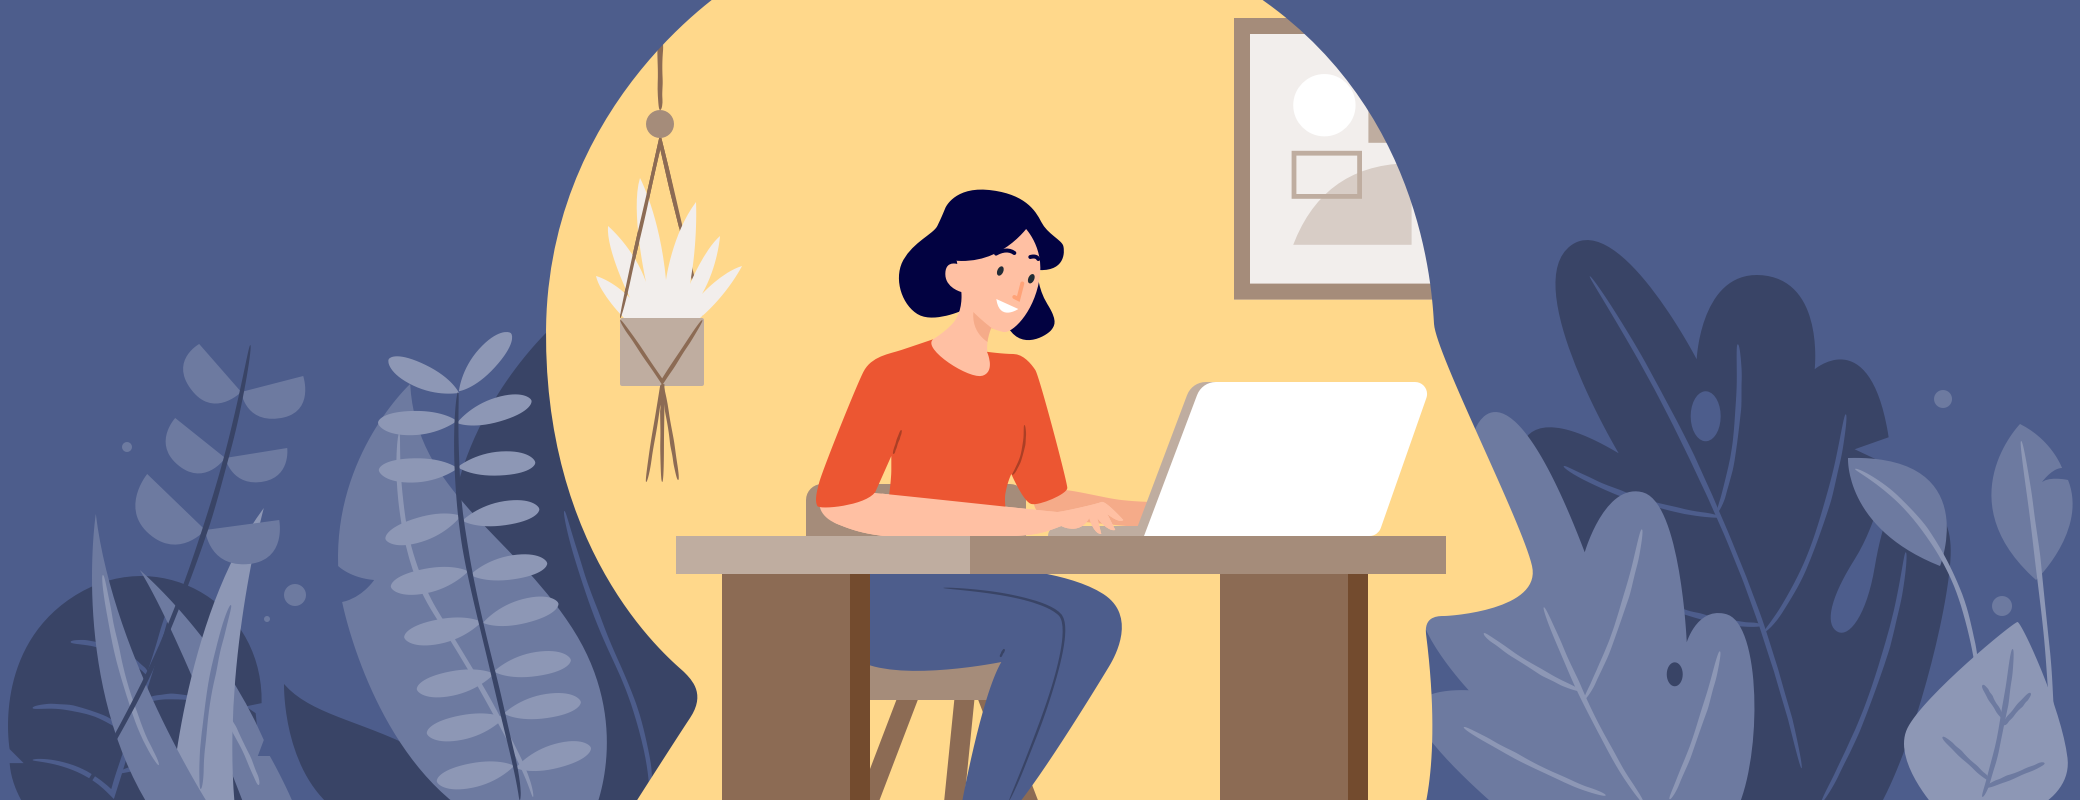 Remote work: Looking beyond productivity and prioritizing mental health